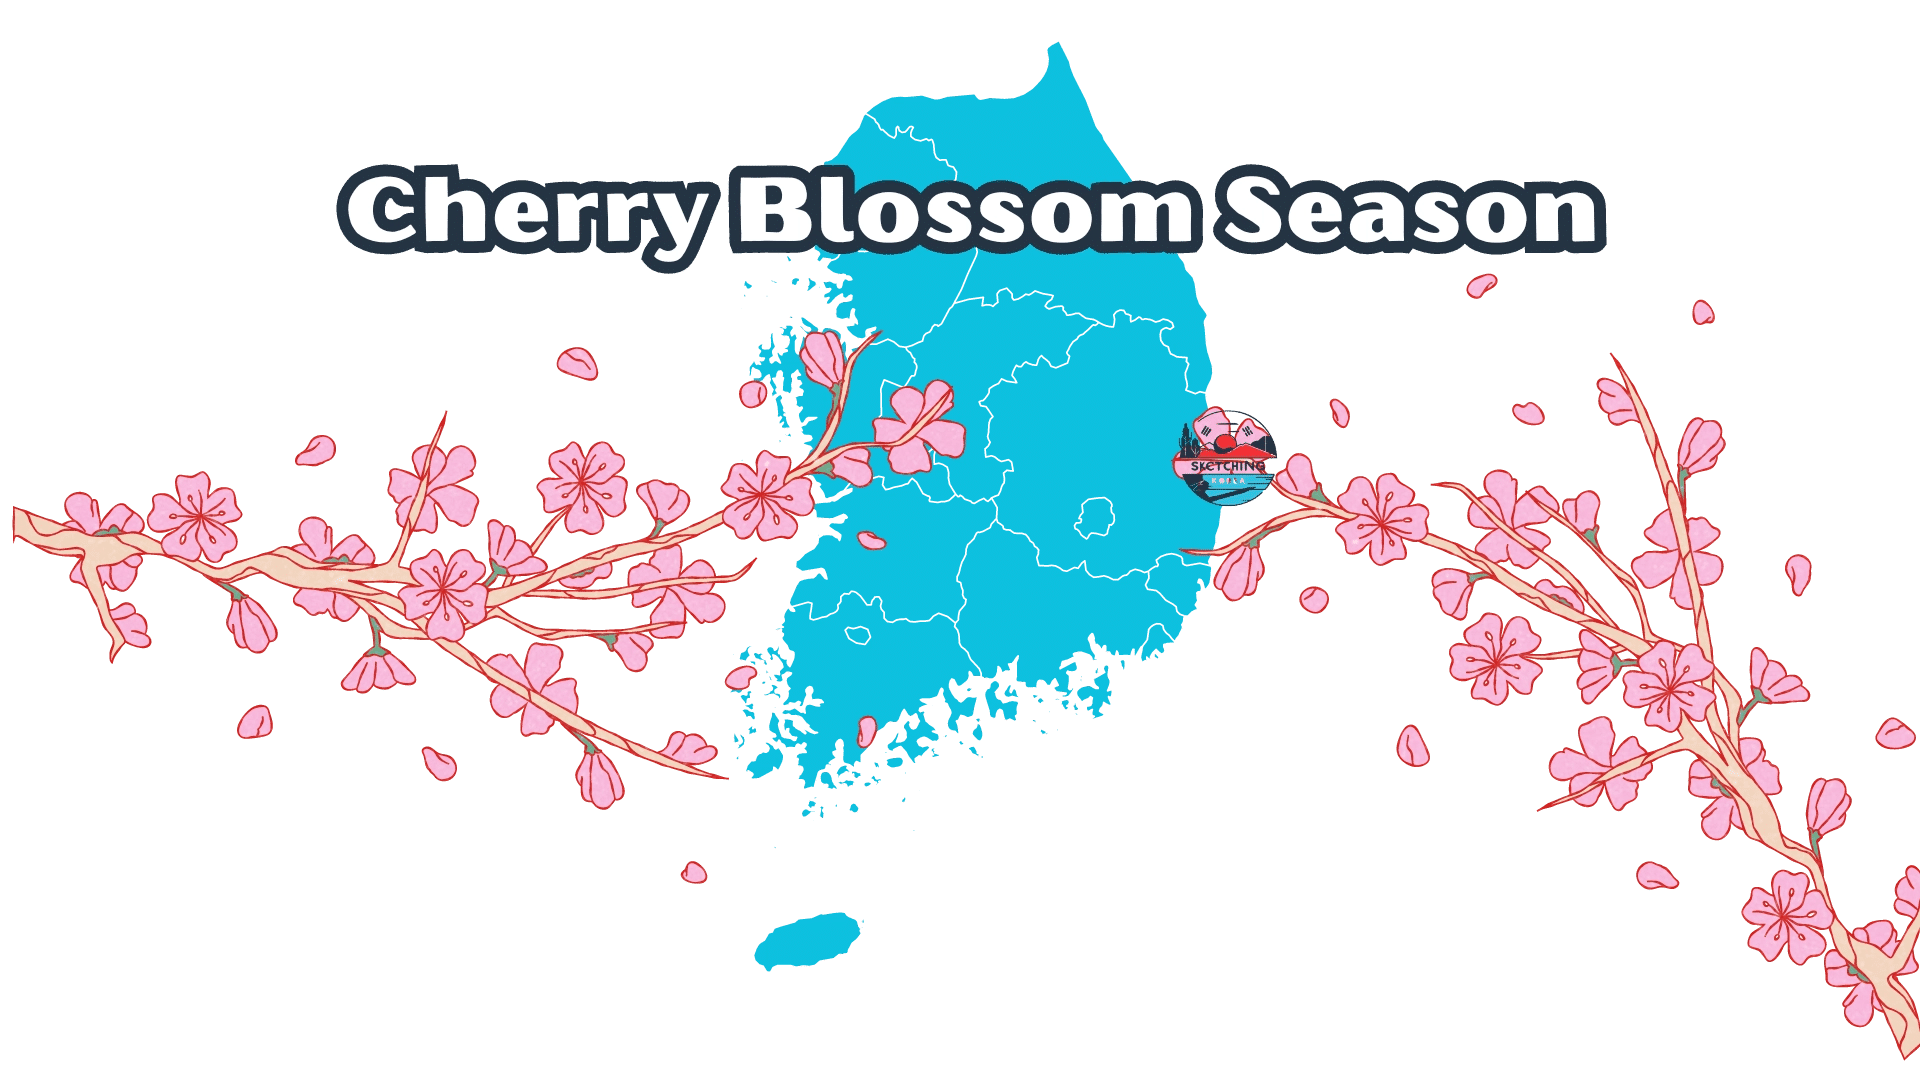 The cherry blossom blooming schedule in Korea is outlined here, along with festivals and prime viewing spots.